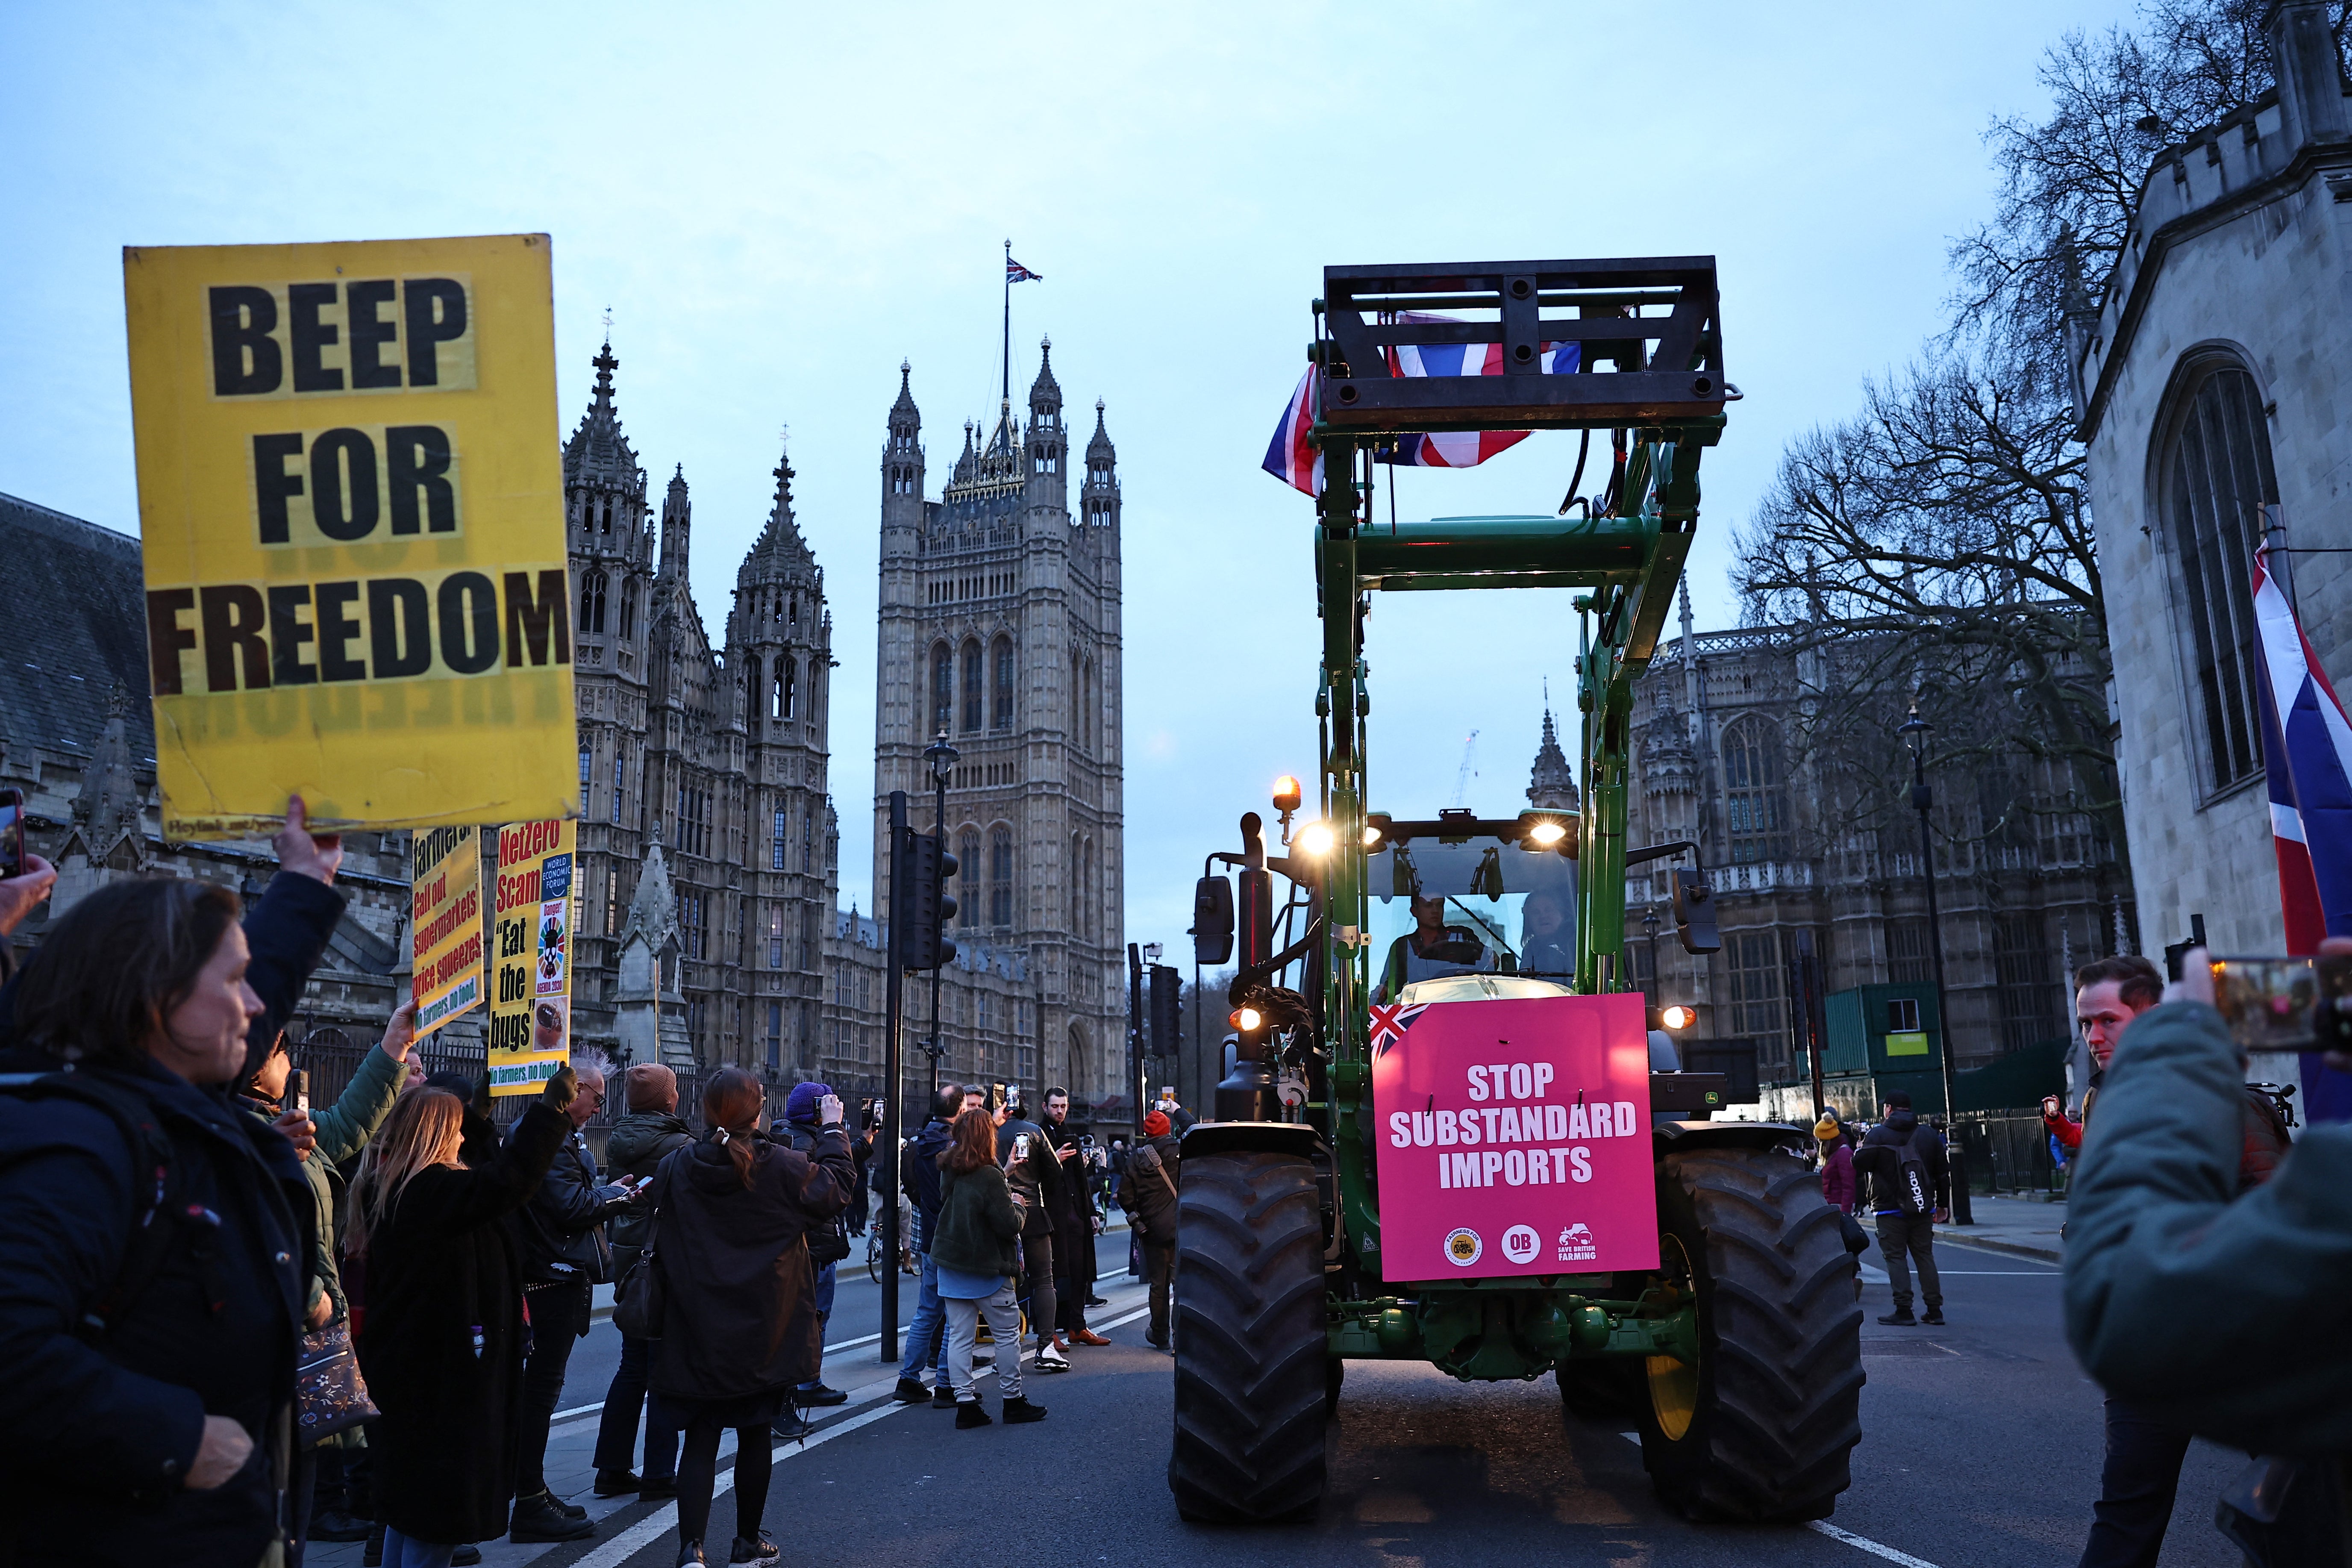 Farmers are protesting at Westminster over trading arrangements they claim will ‘decimate’ British farming